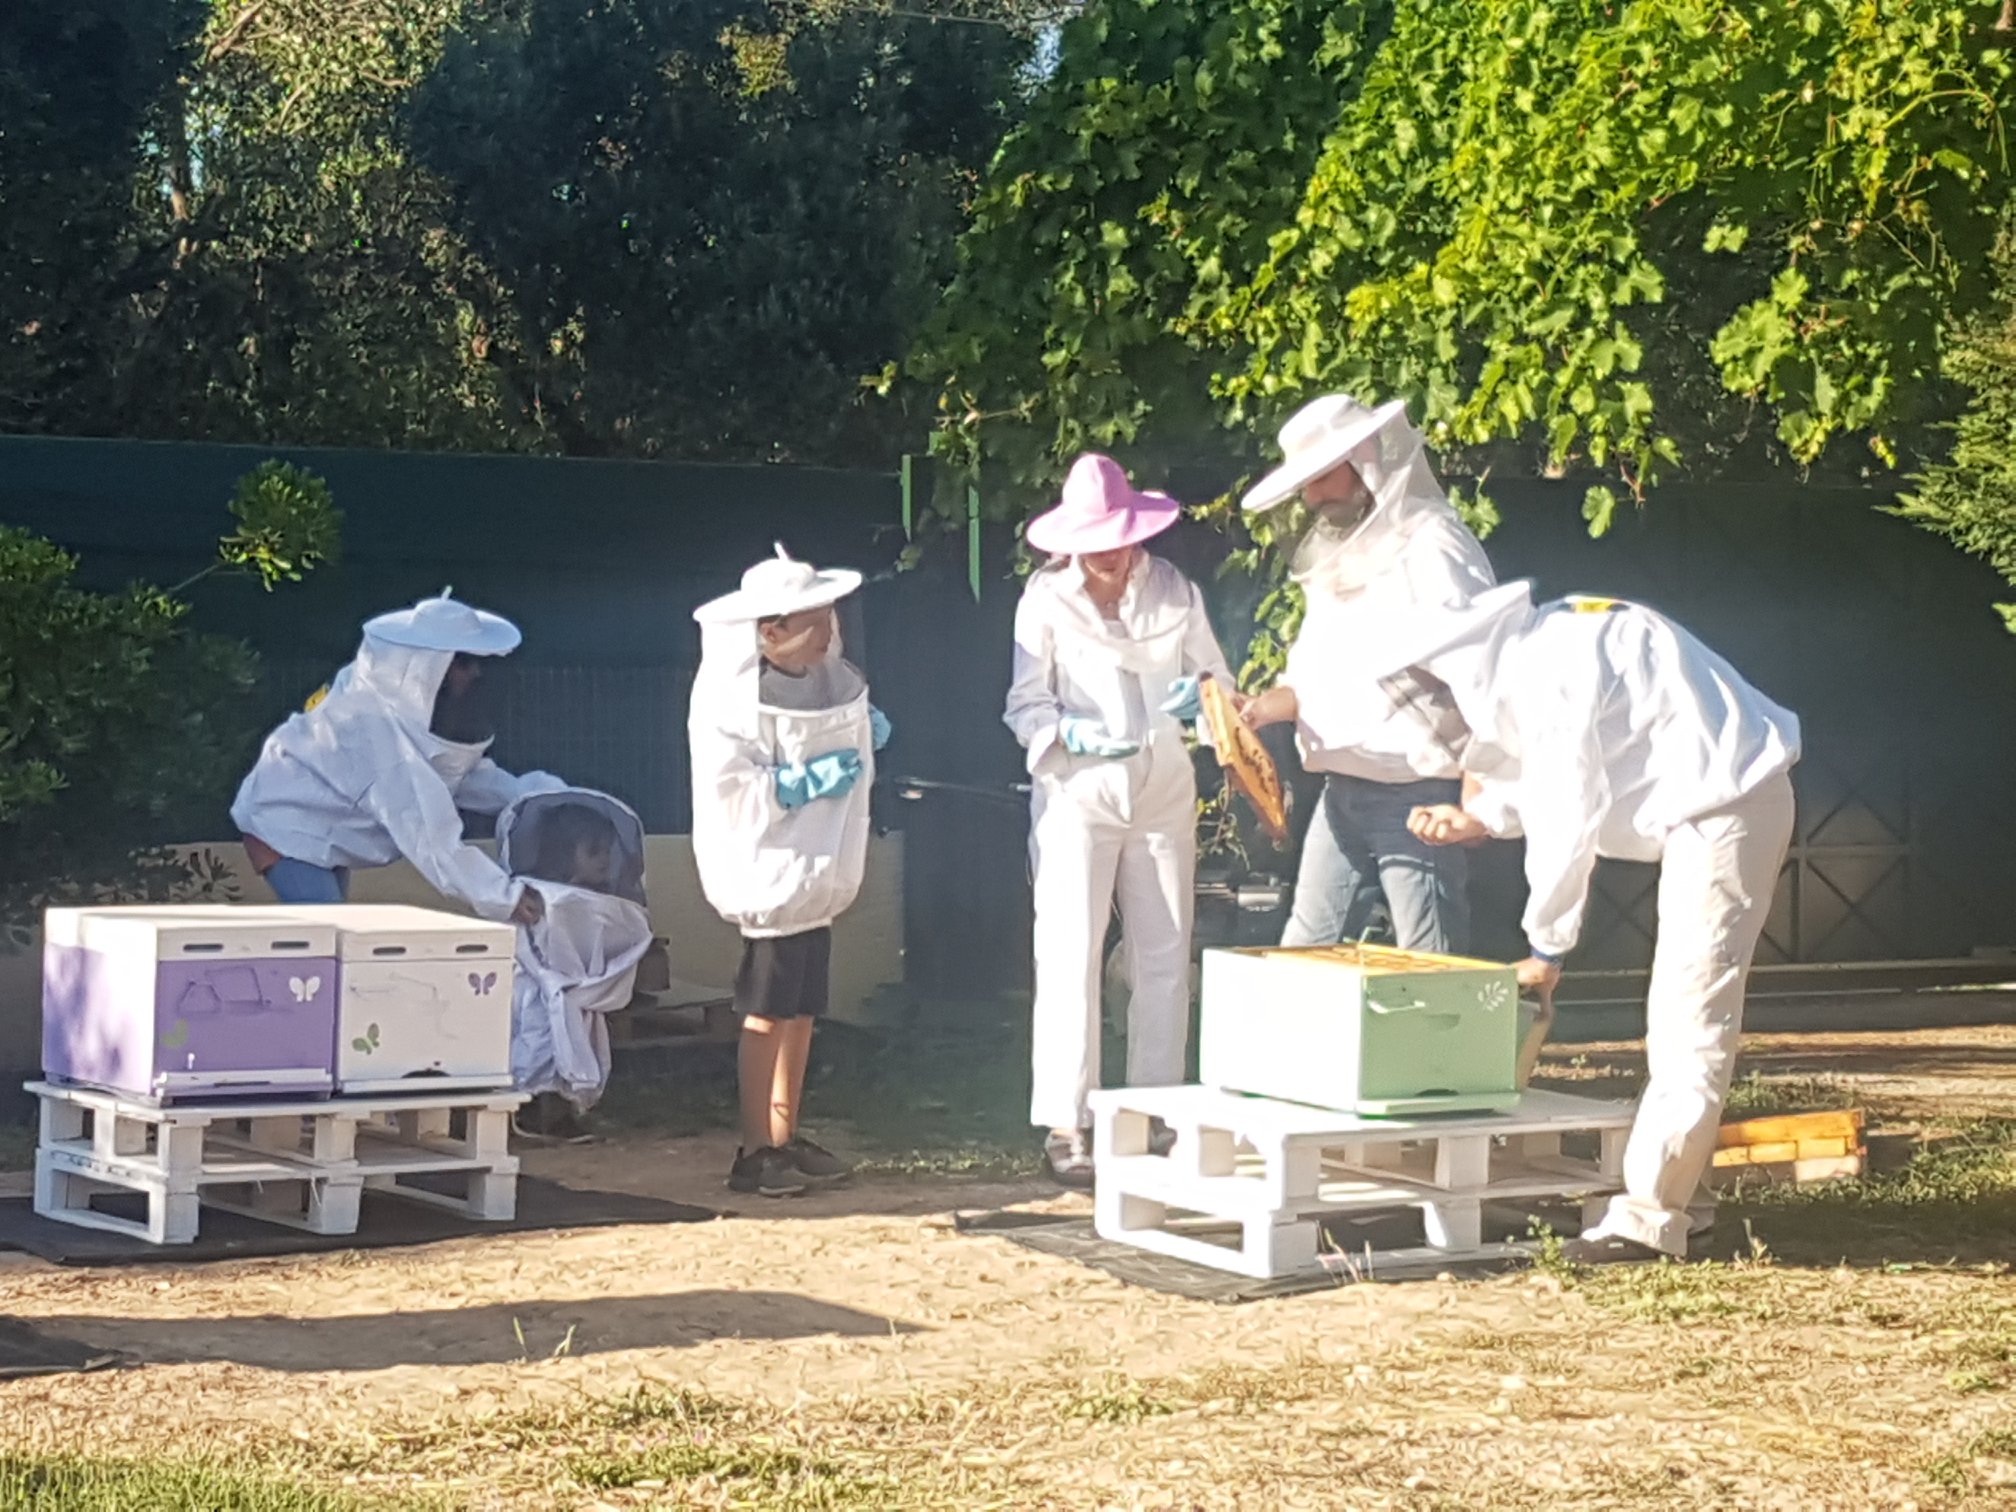 Open Farm Days 2021 | From A to Bee ΚοινΣΕπ, Παλλήνη, 25/9